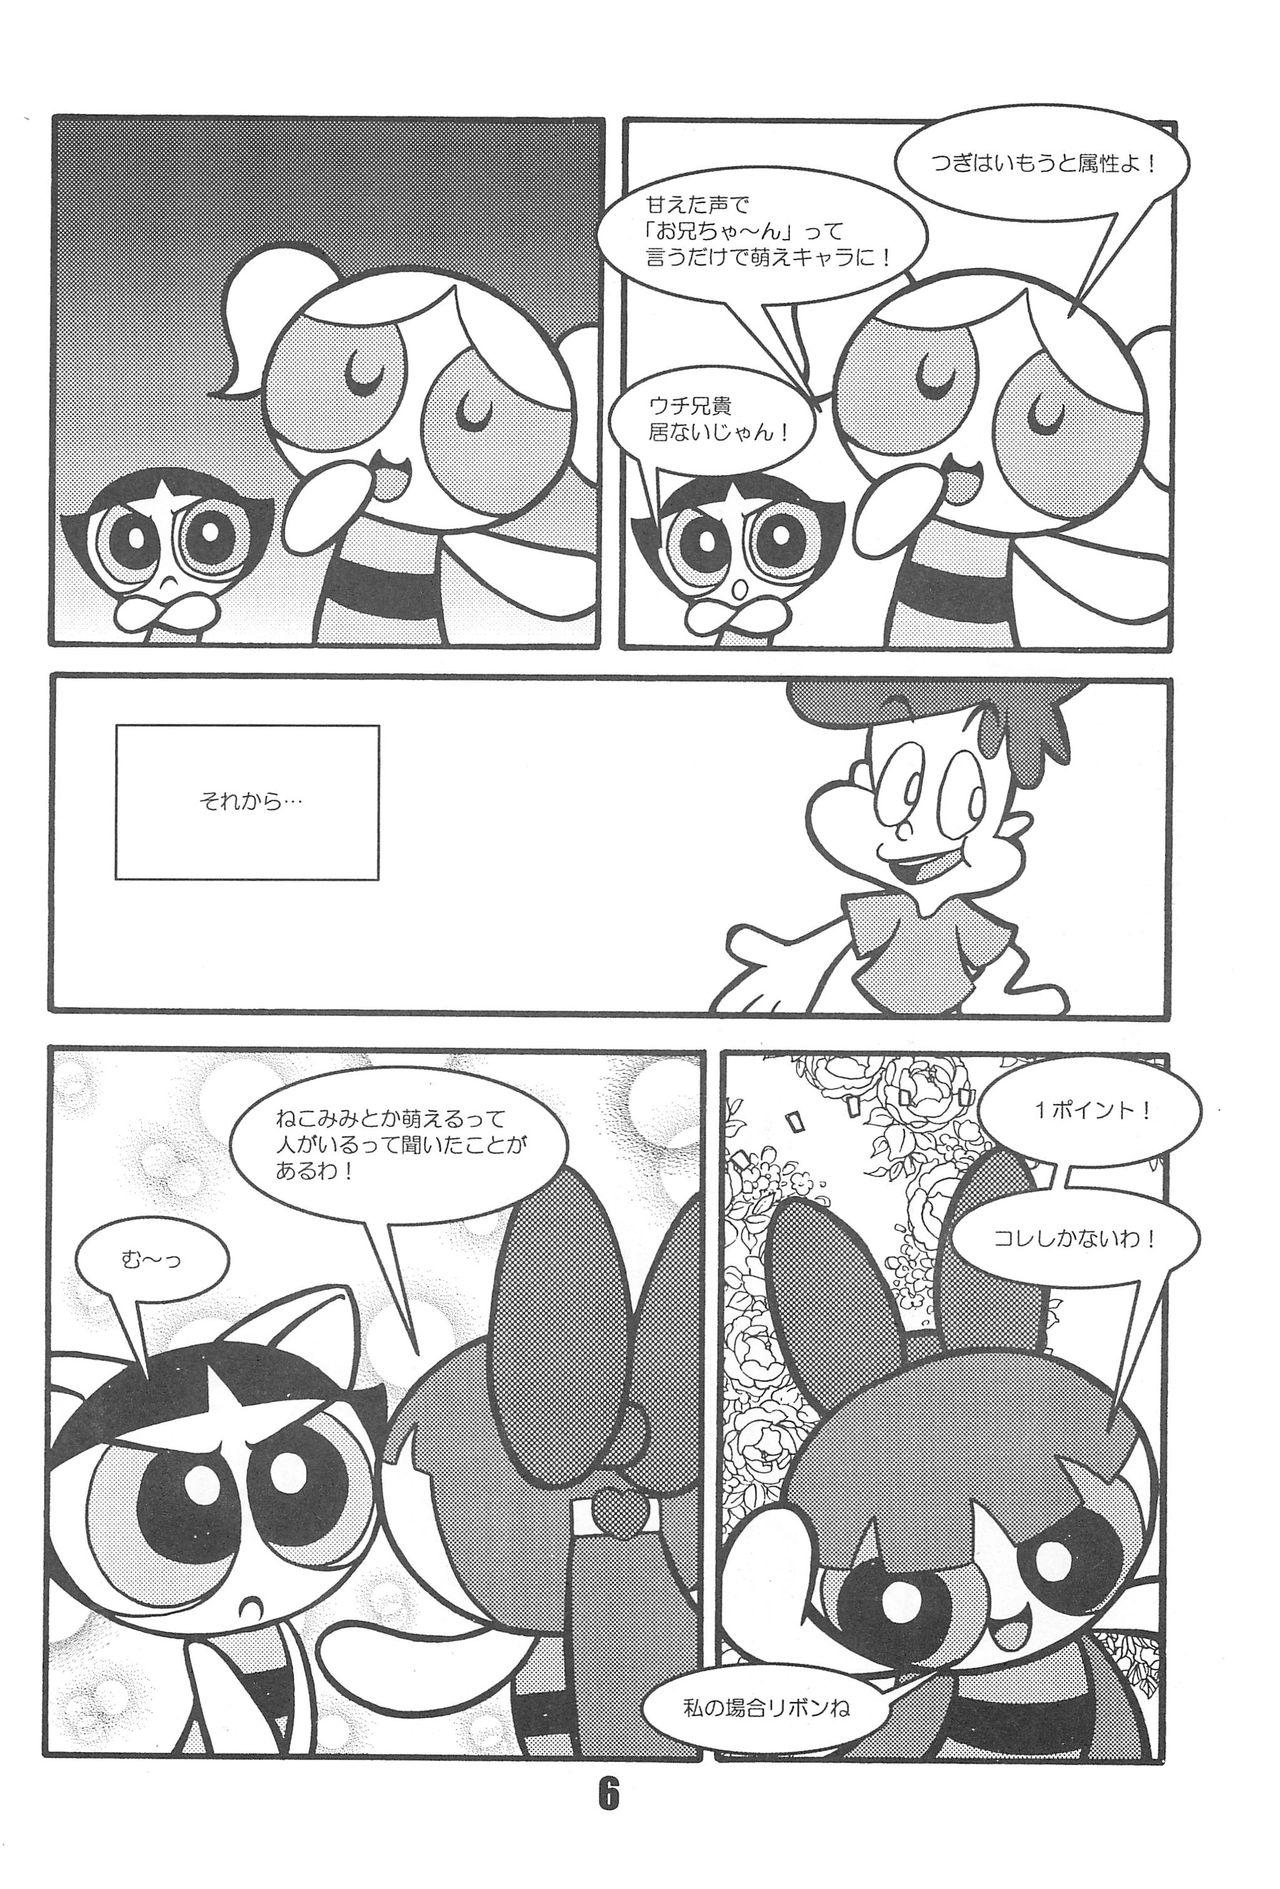 Assfucked Show Goes On! Funhouse 22th - The powerpuff girls Ruiva - Page 6